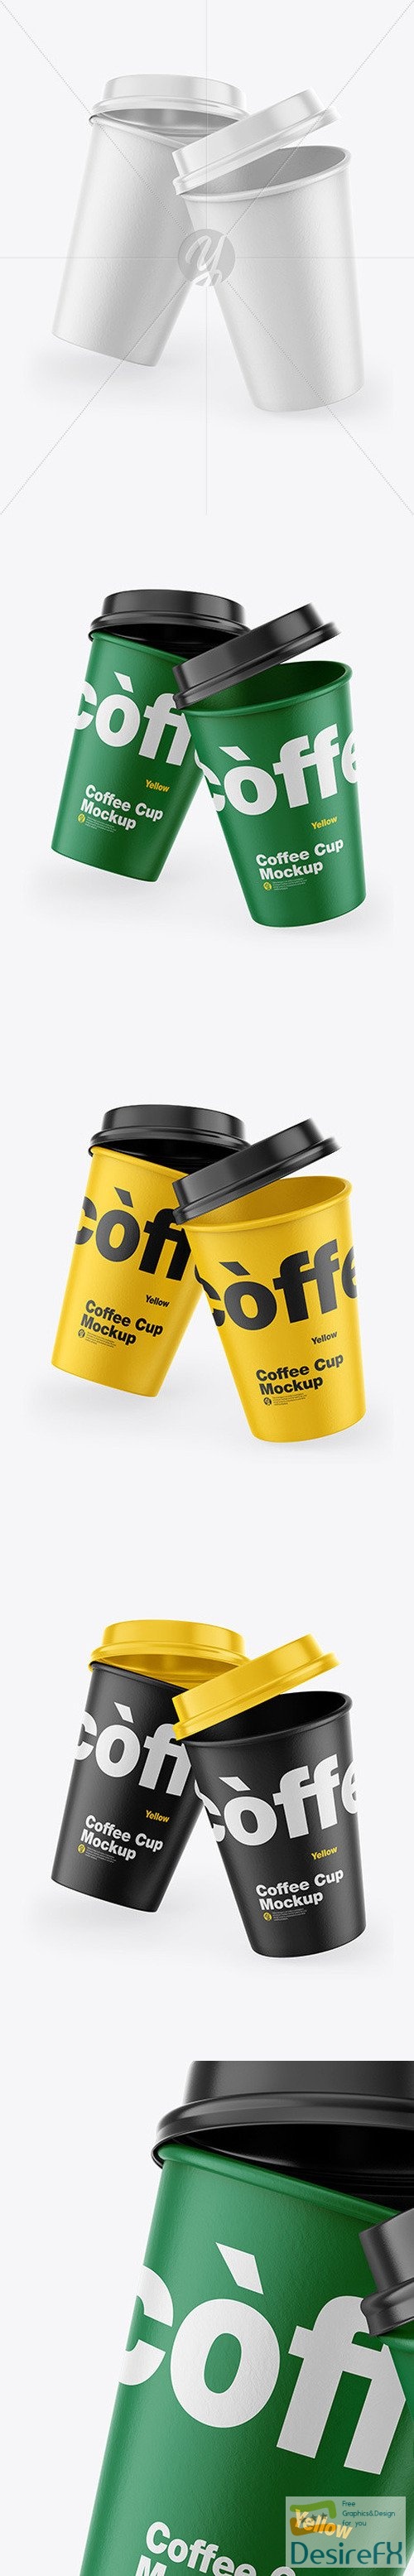 Paper Coffee Cup Mockup 54613